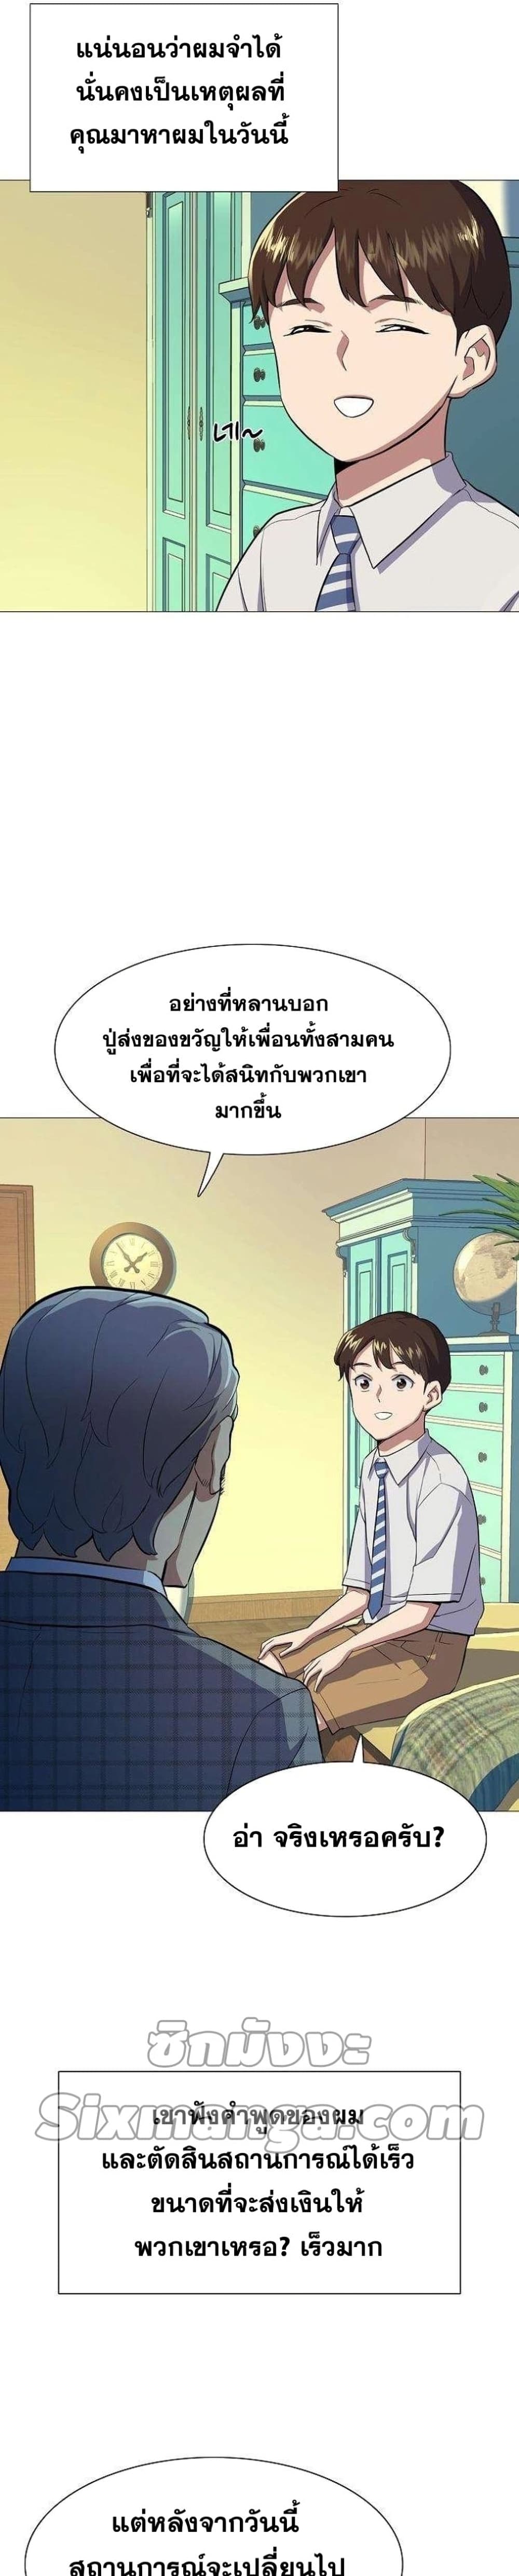 The Chaebeol’s Youngest Son ตอนที่ 4 (26)